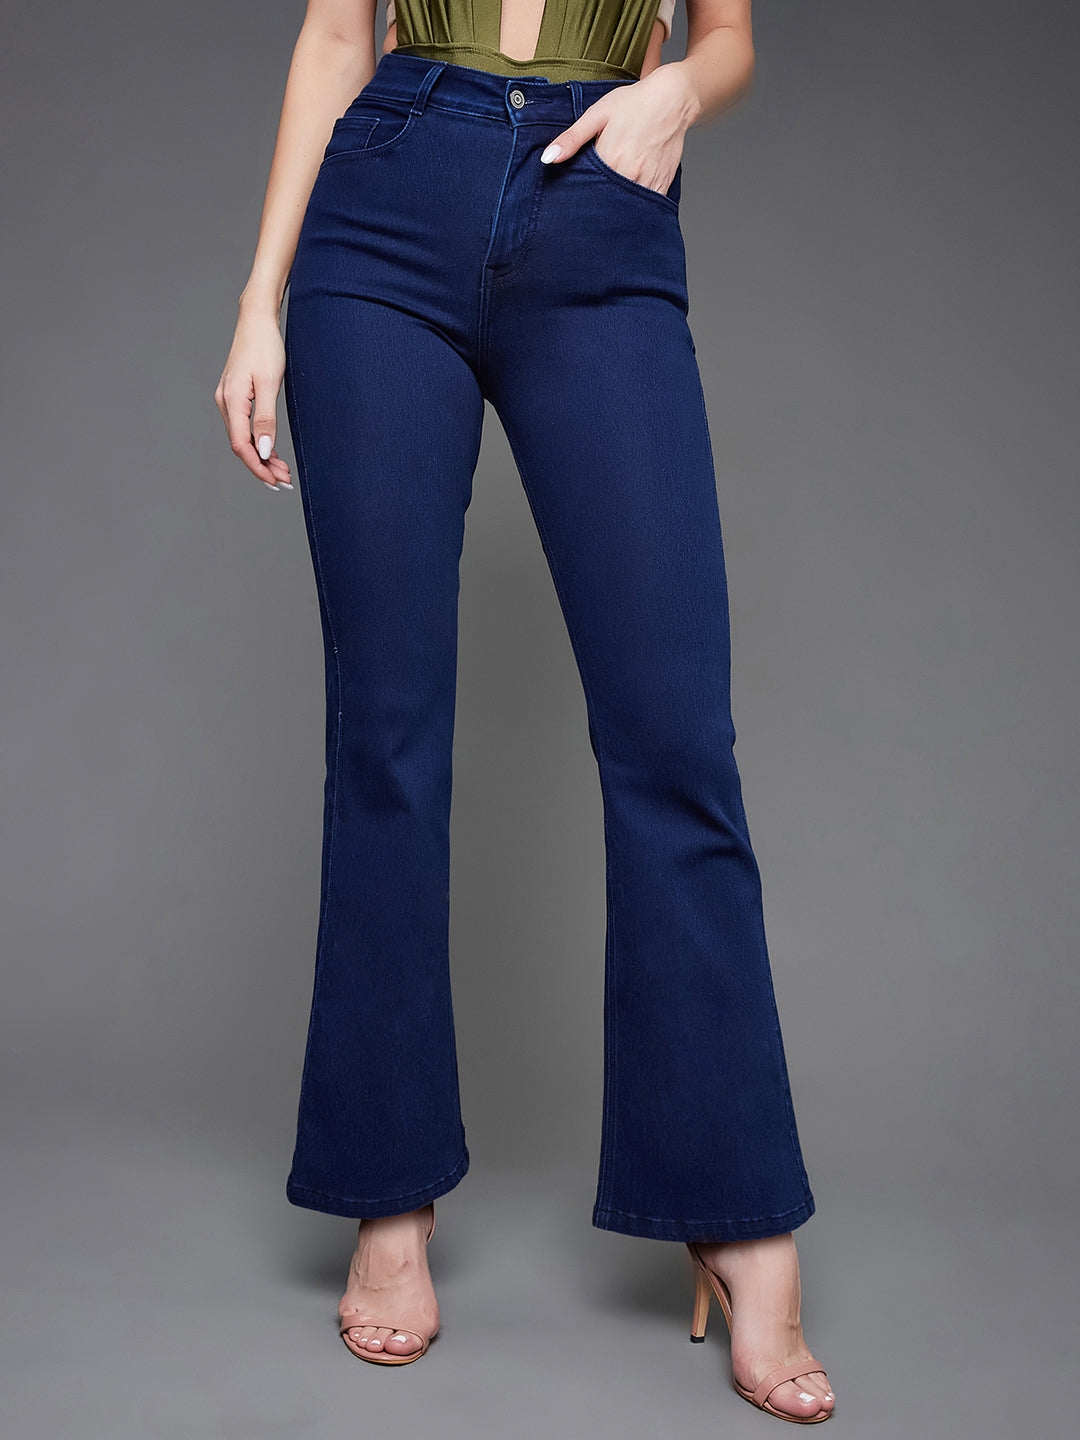 MISS CHASE | Navy Blue Bootcut High Rise Clean Look Regular Length Stretchable Denim Jeans